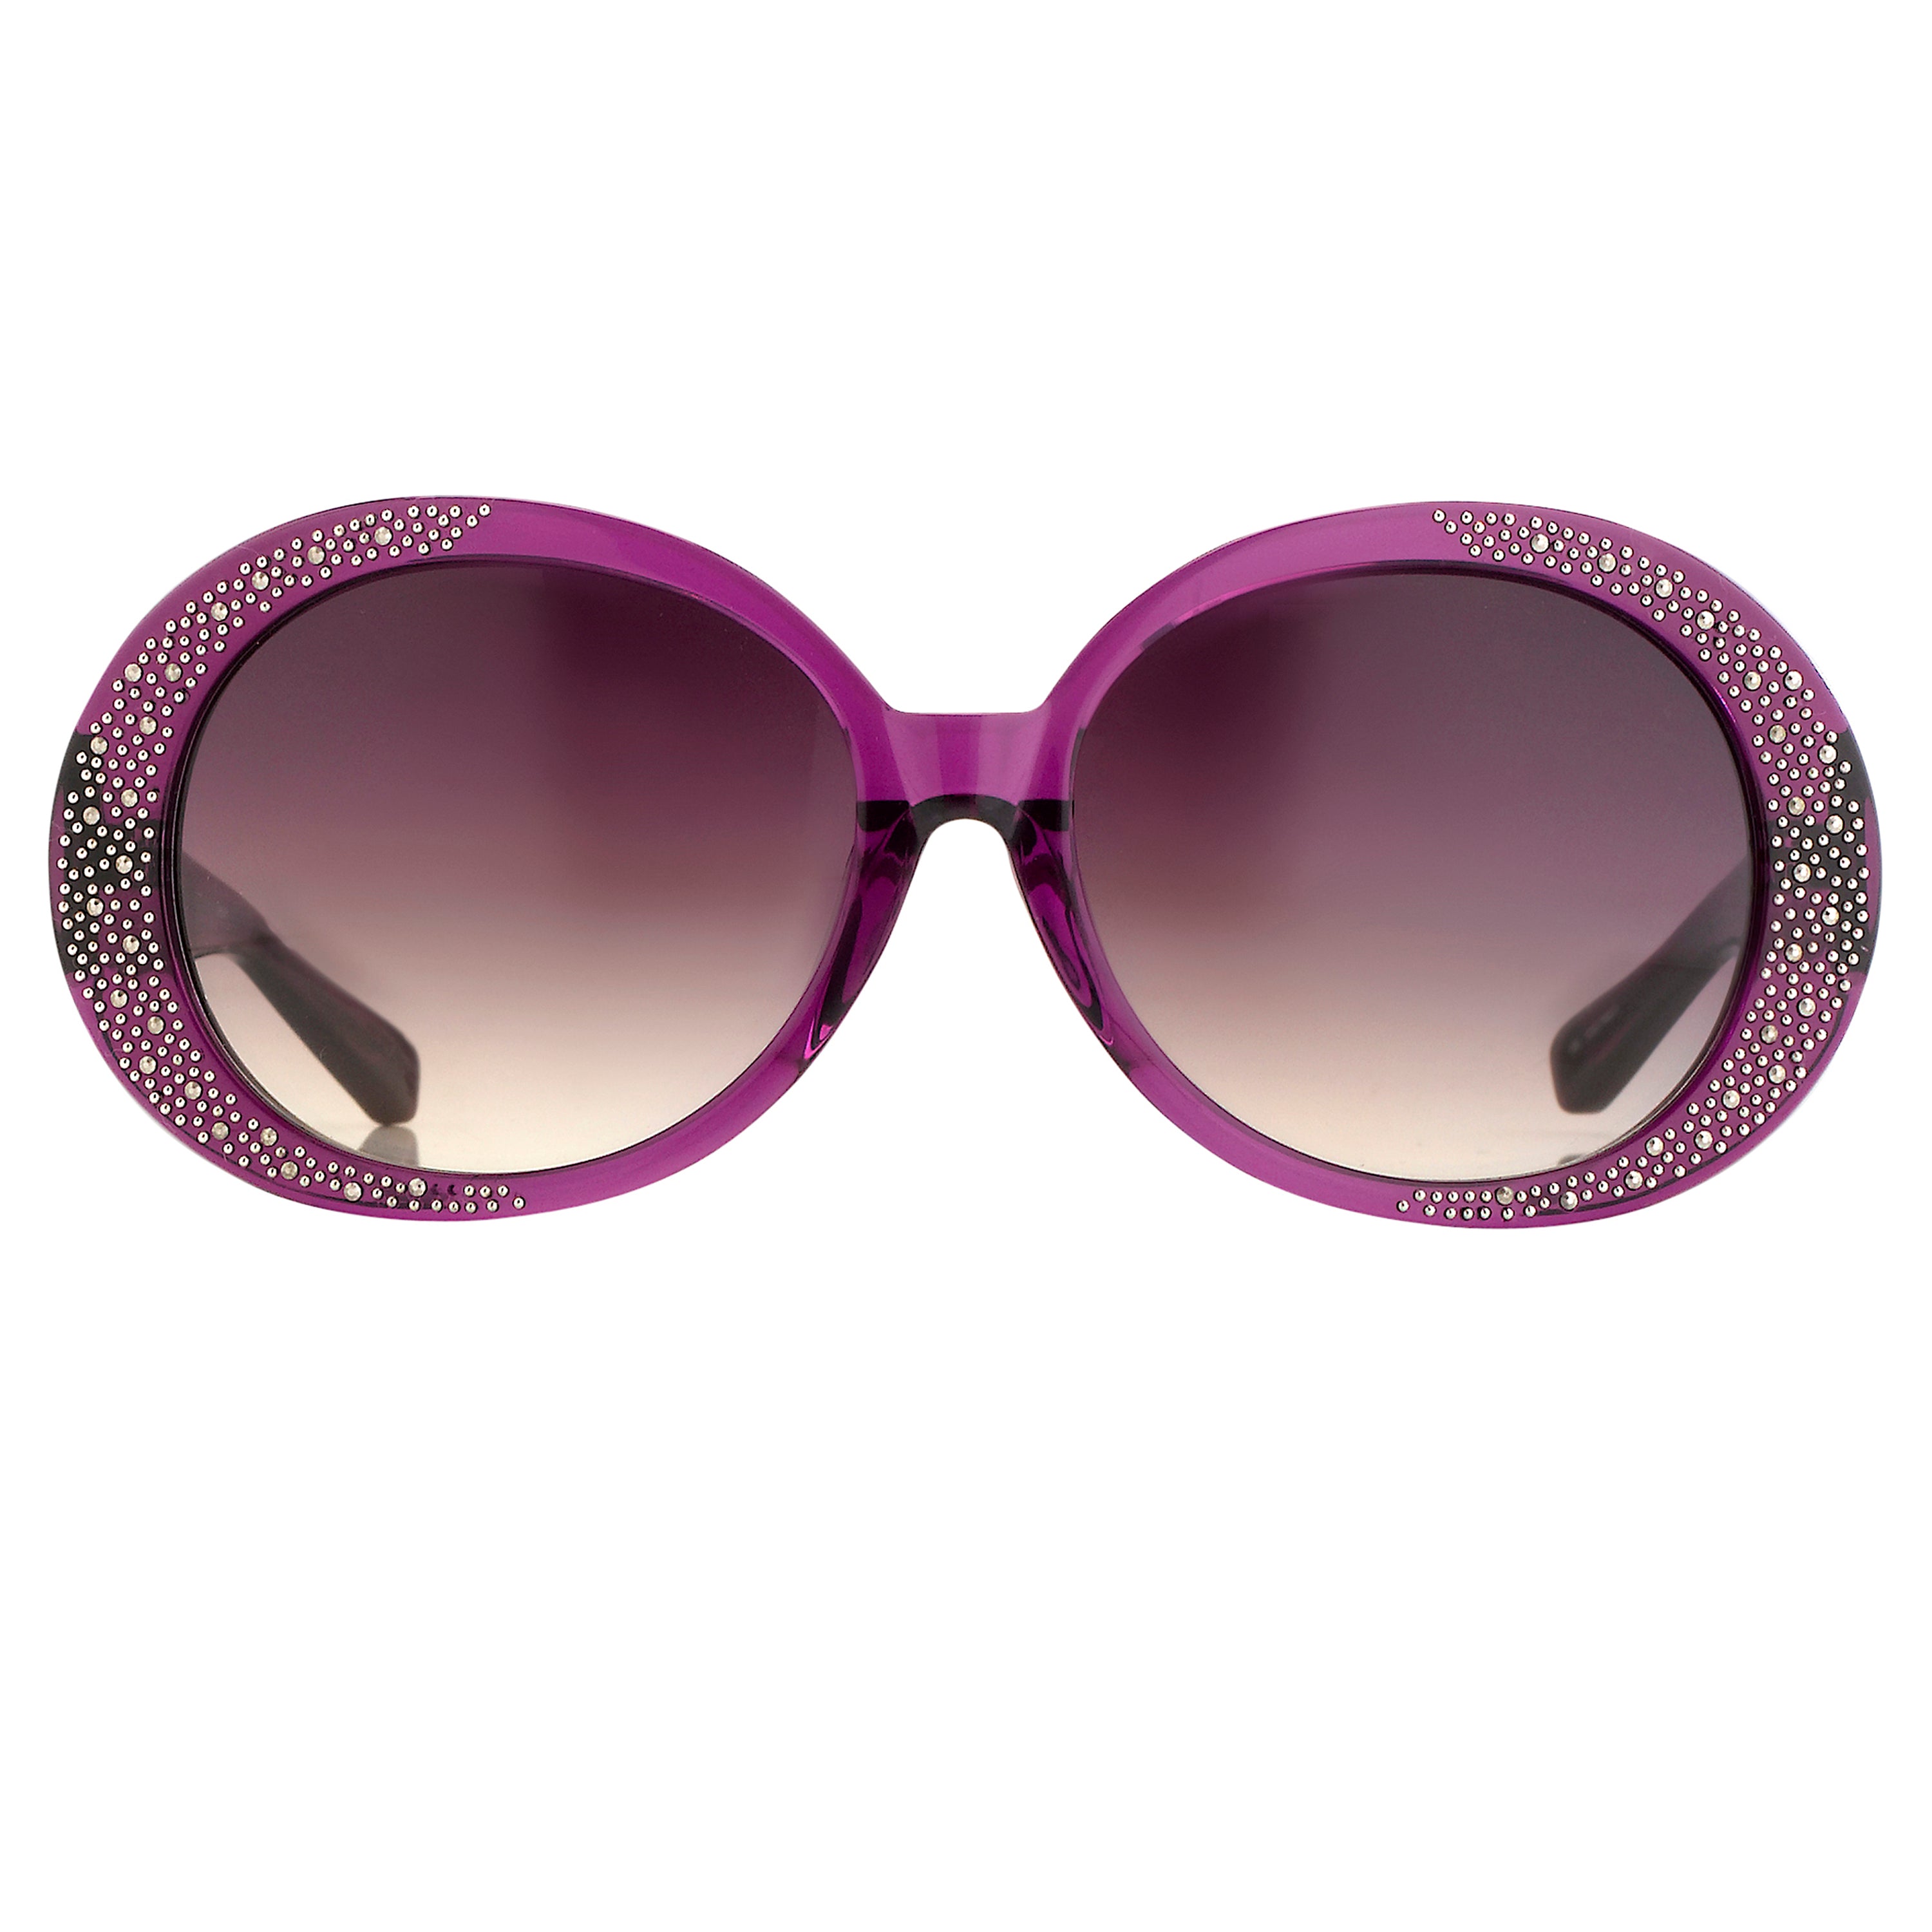 Agent Provocateur by Linda Farrow - Oversized Frame Purple and Brown Lenses